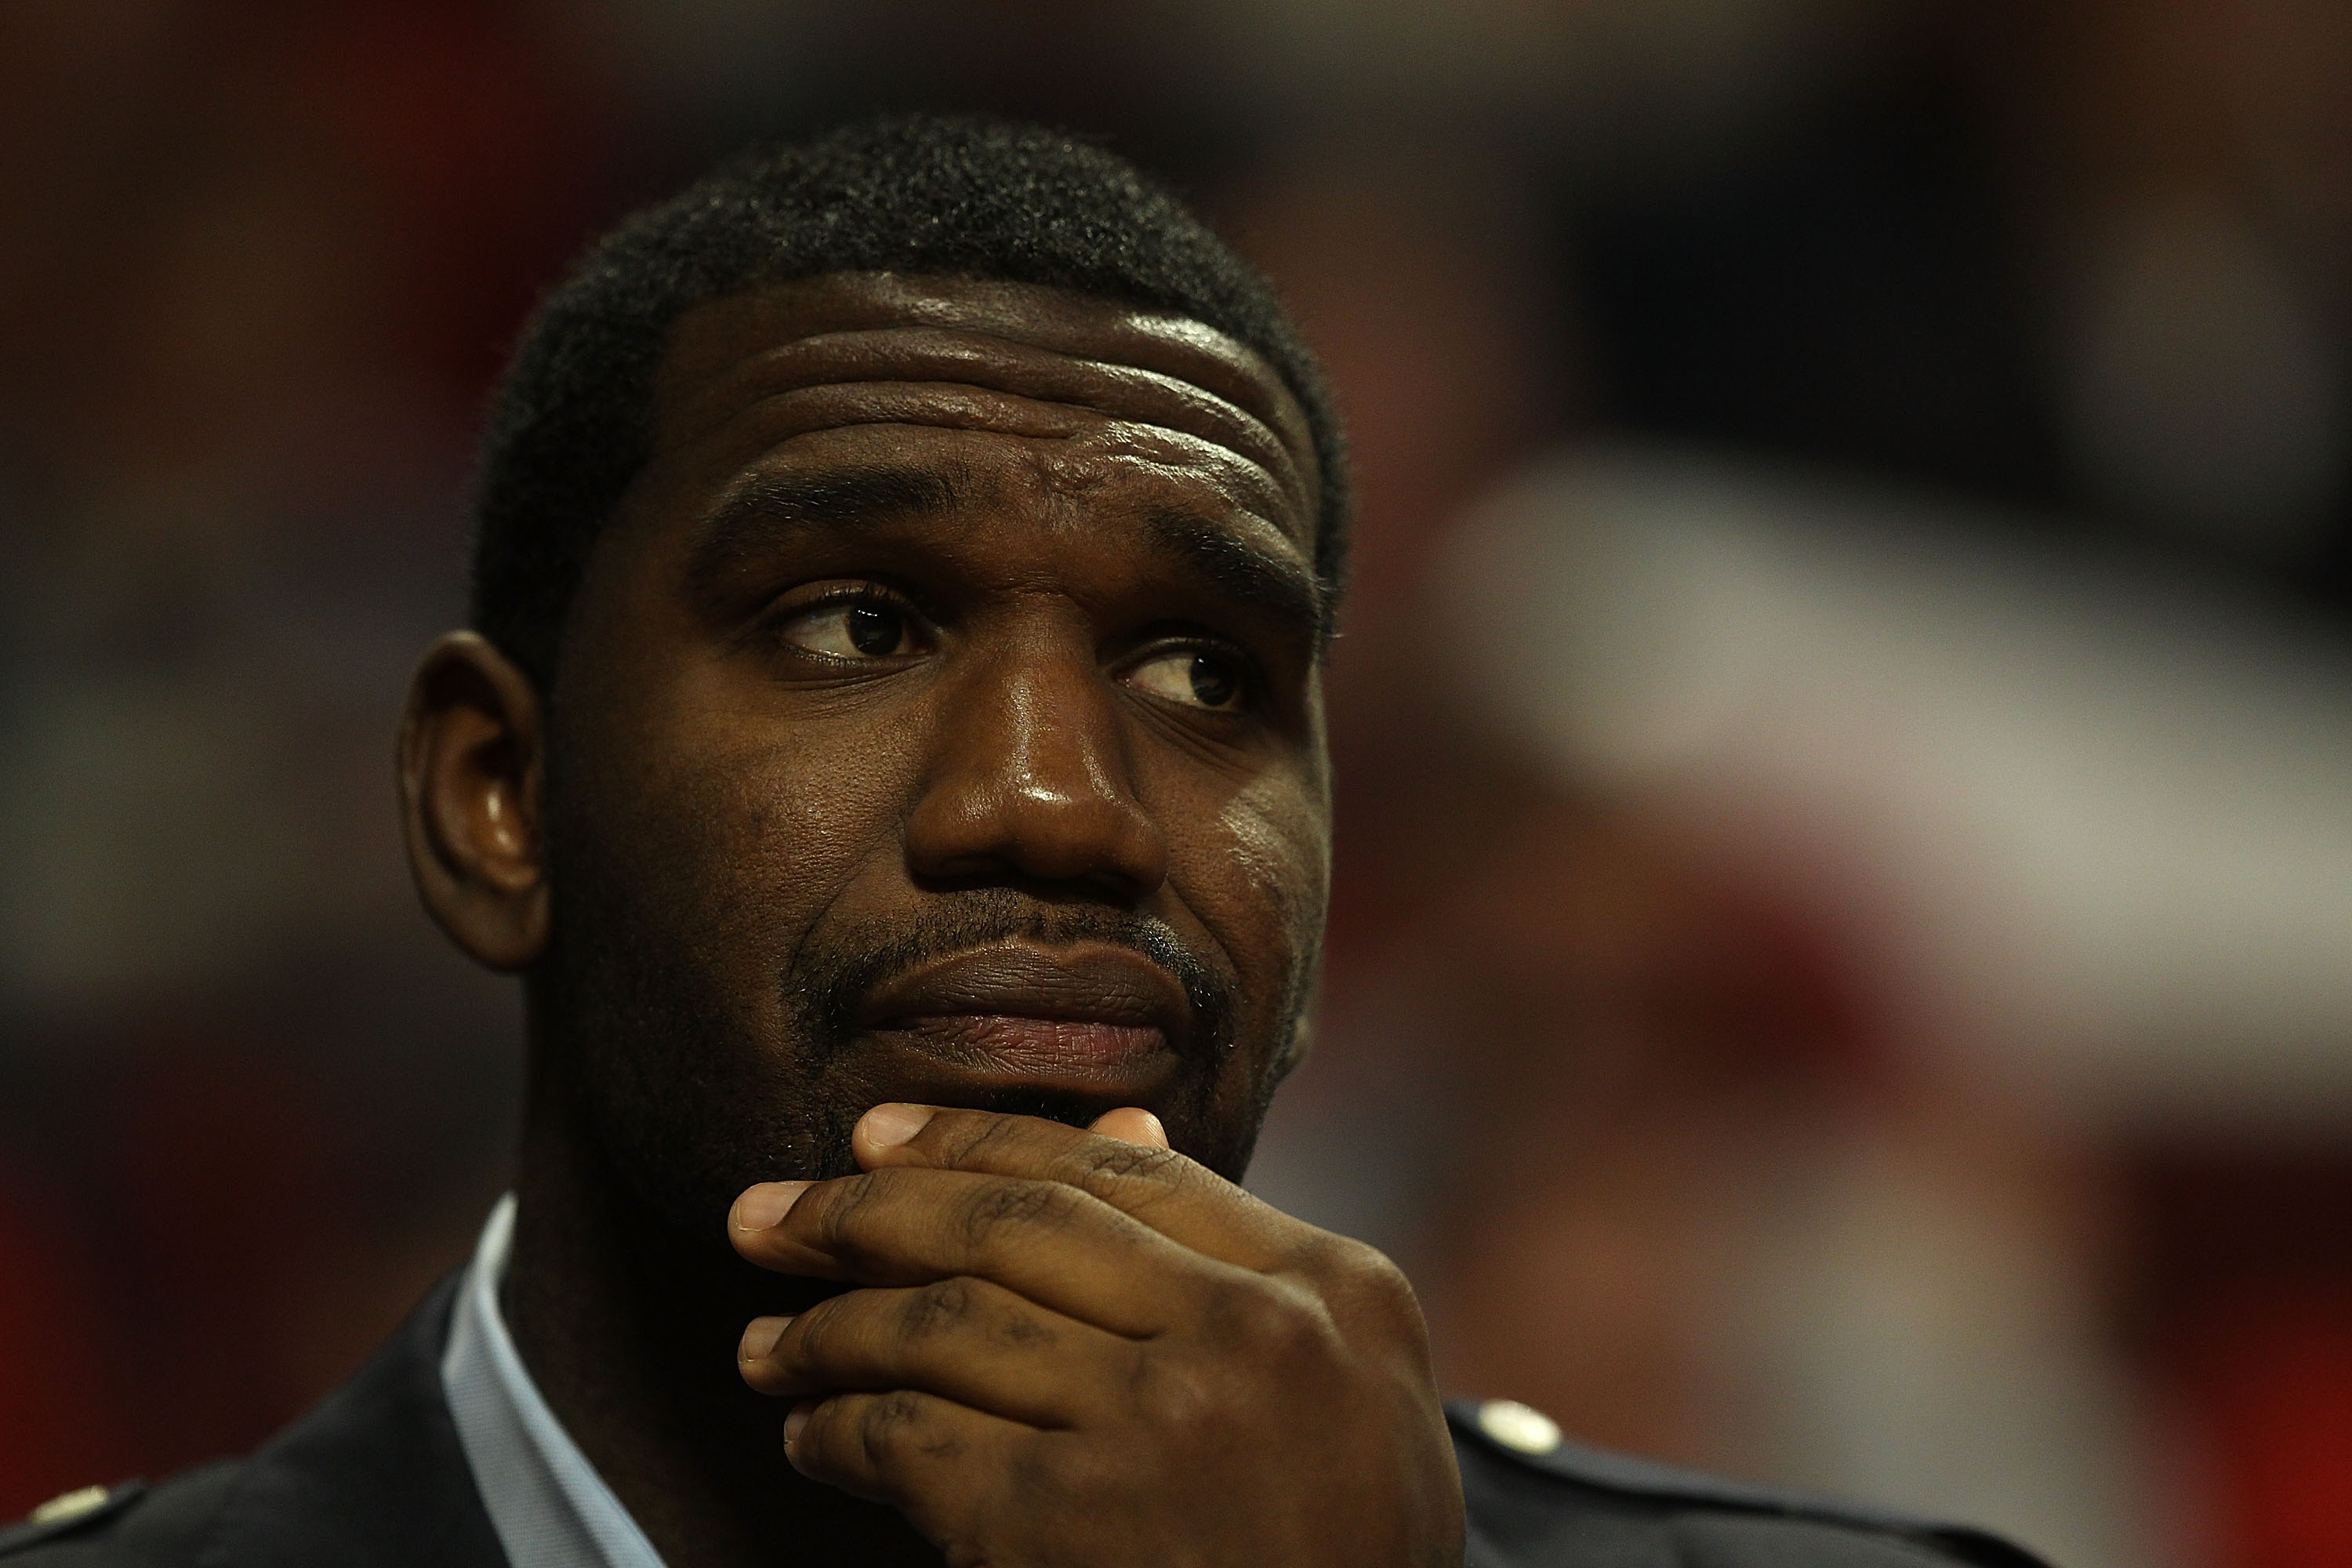 CHICAGO - NOVEMBER 01: Greg Oden #52 of the Portland Trail Blazers watches from the bench as his teammates take on the Chicago Bulls at the United Center on November 1, 2010 in Chicago, Illinois. The Bulls defeated the Trail Blazers 110-98. NOTE TO USER: